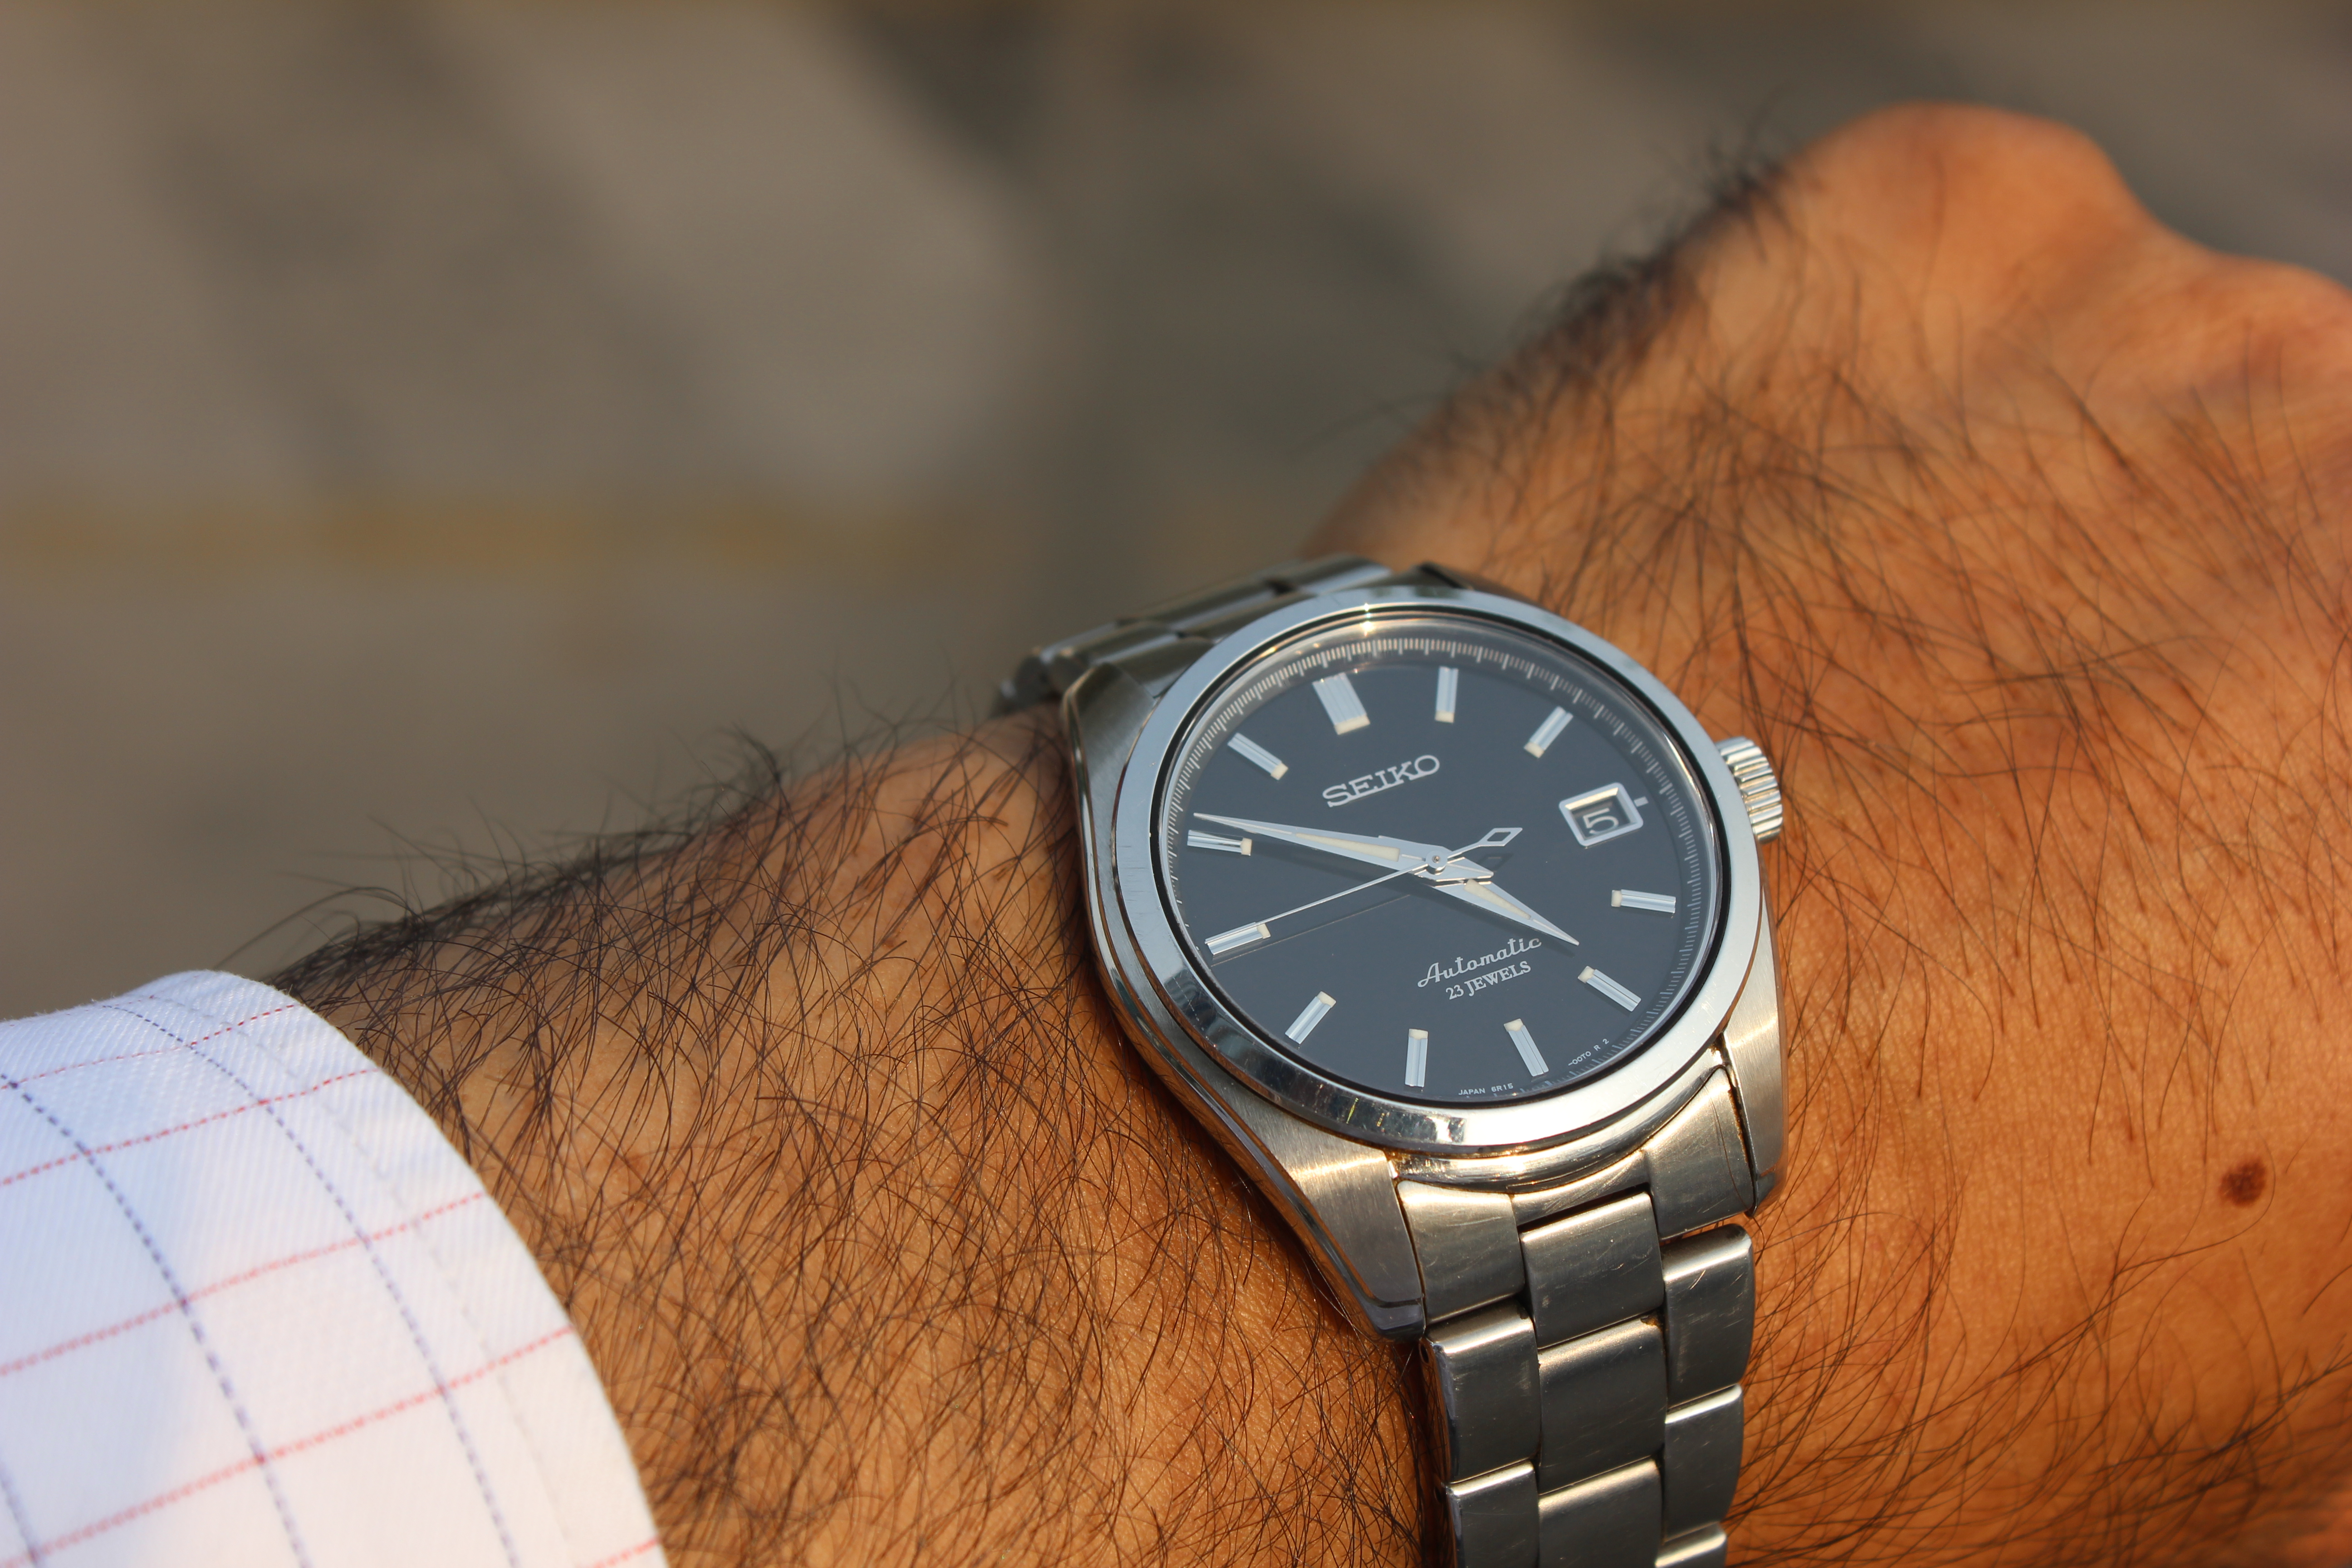 Seiko SARB033 Automatic Watch Review